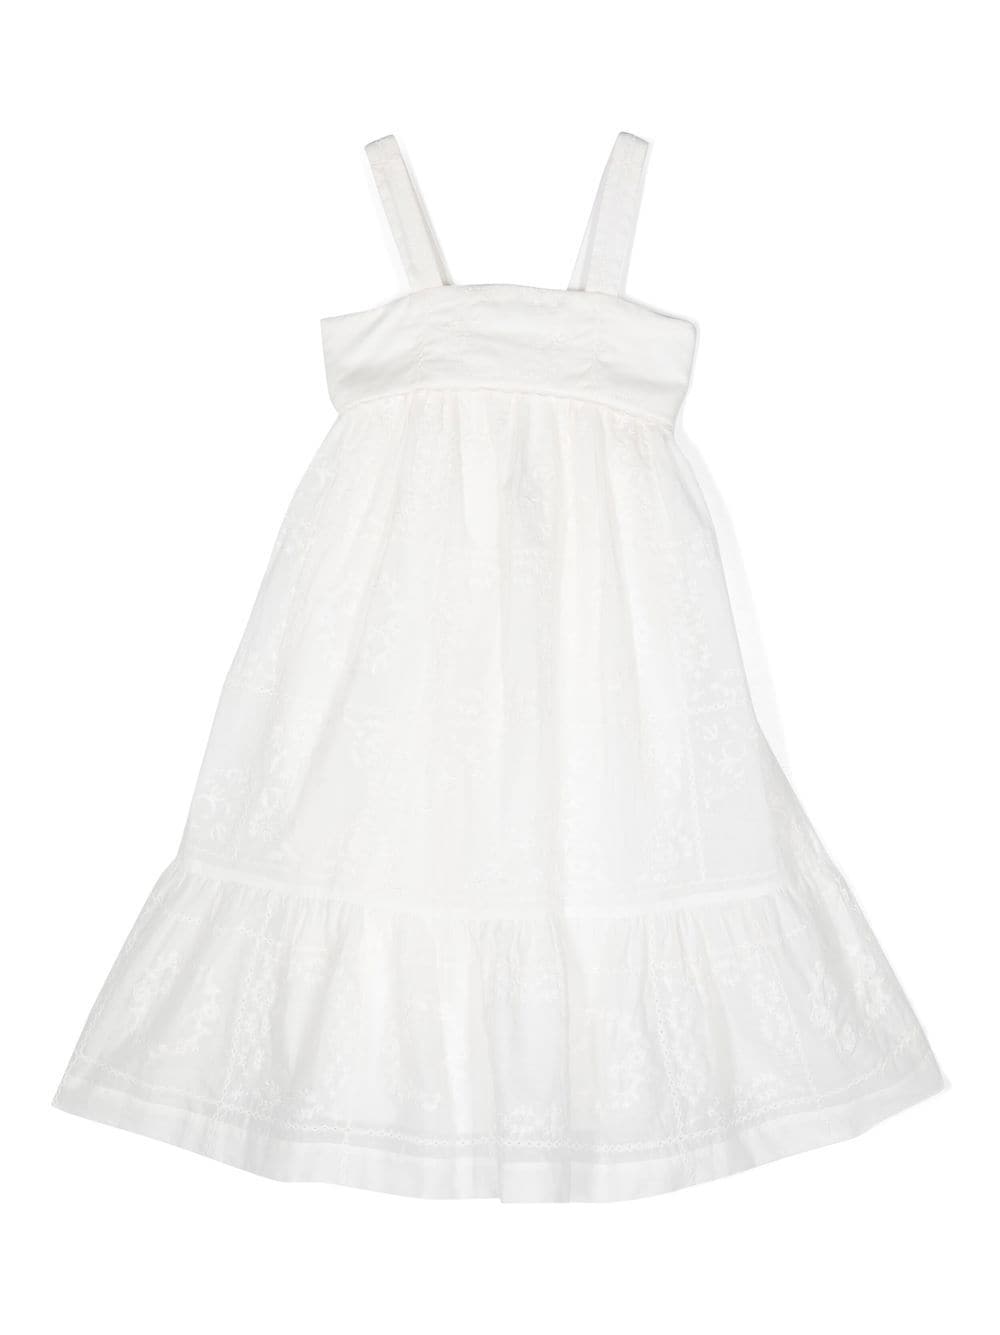 Chloé Kids' Embroidered Sleeveless Dress In White